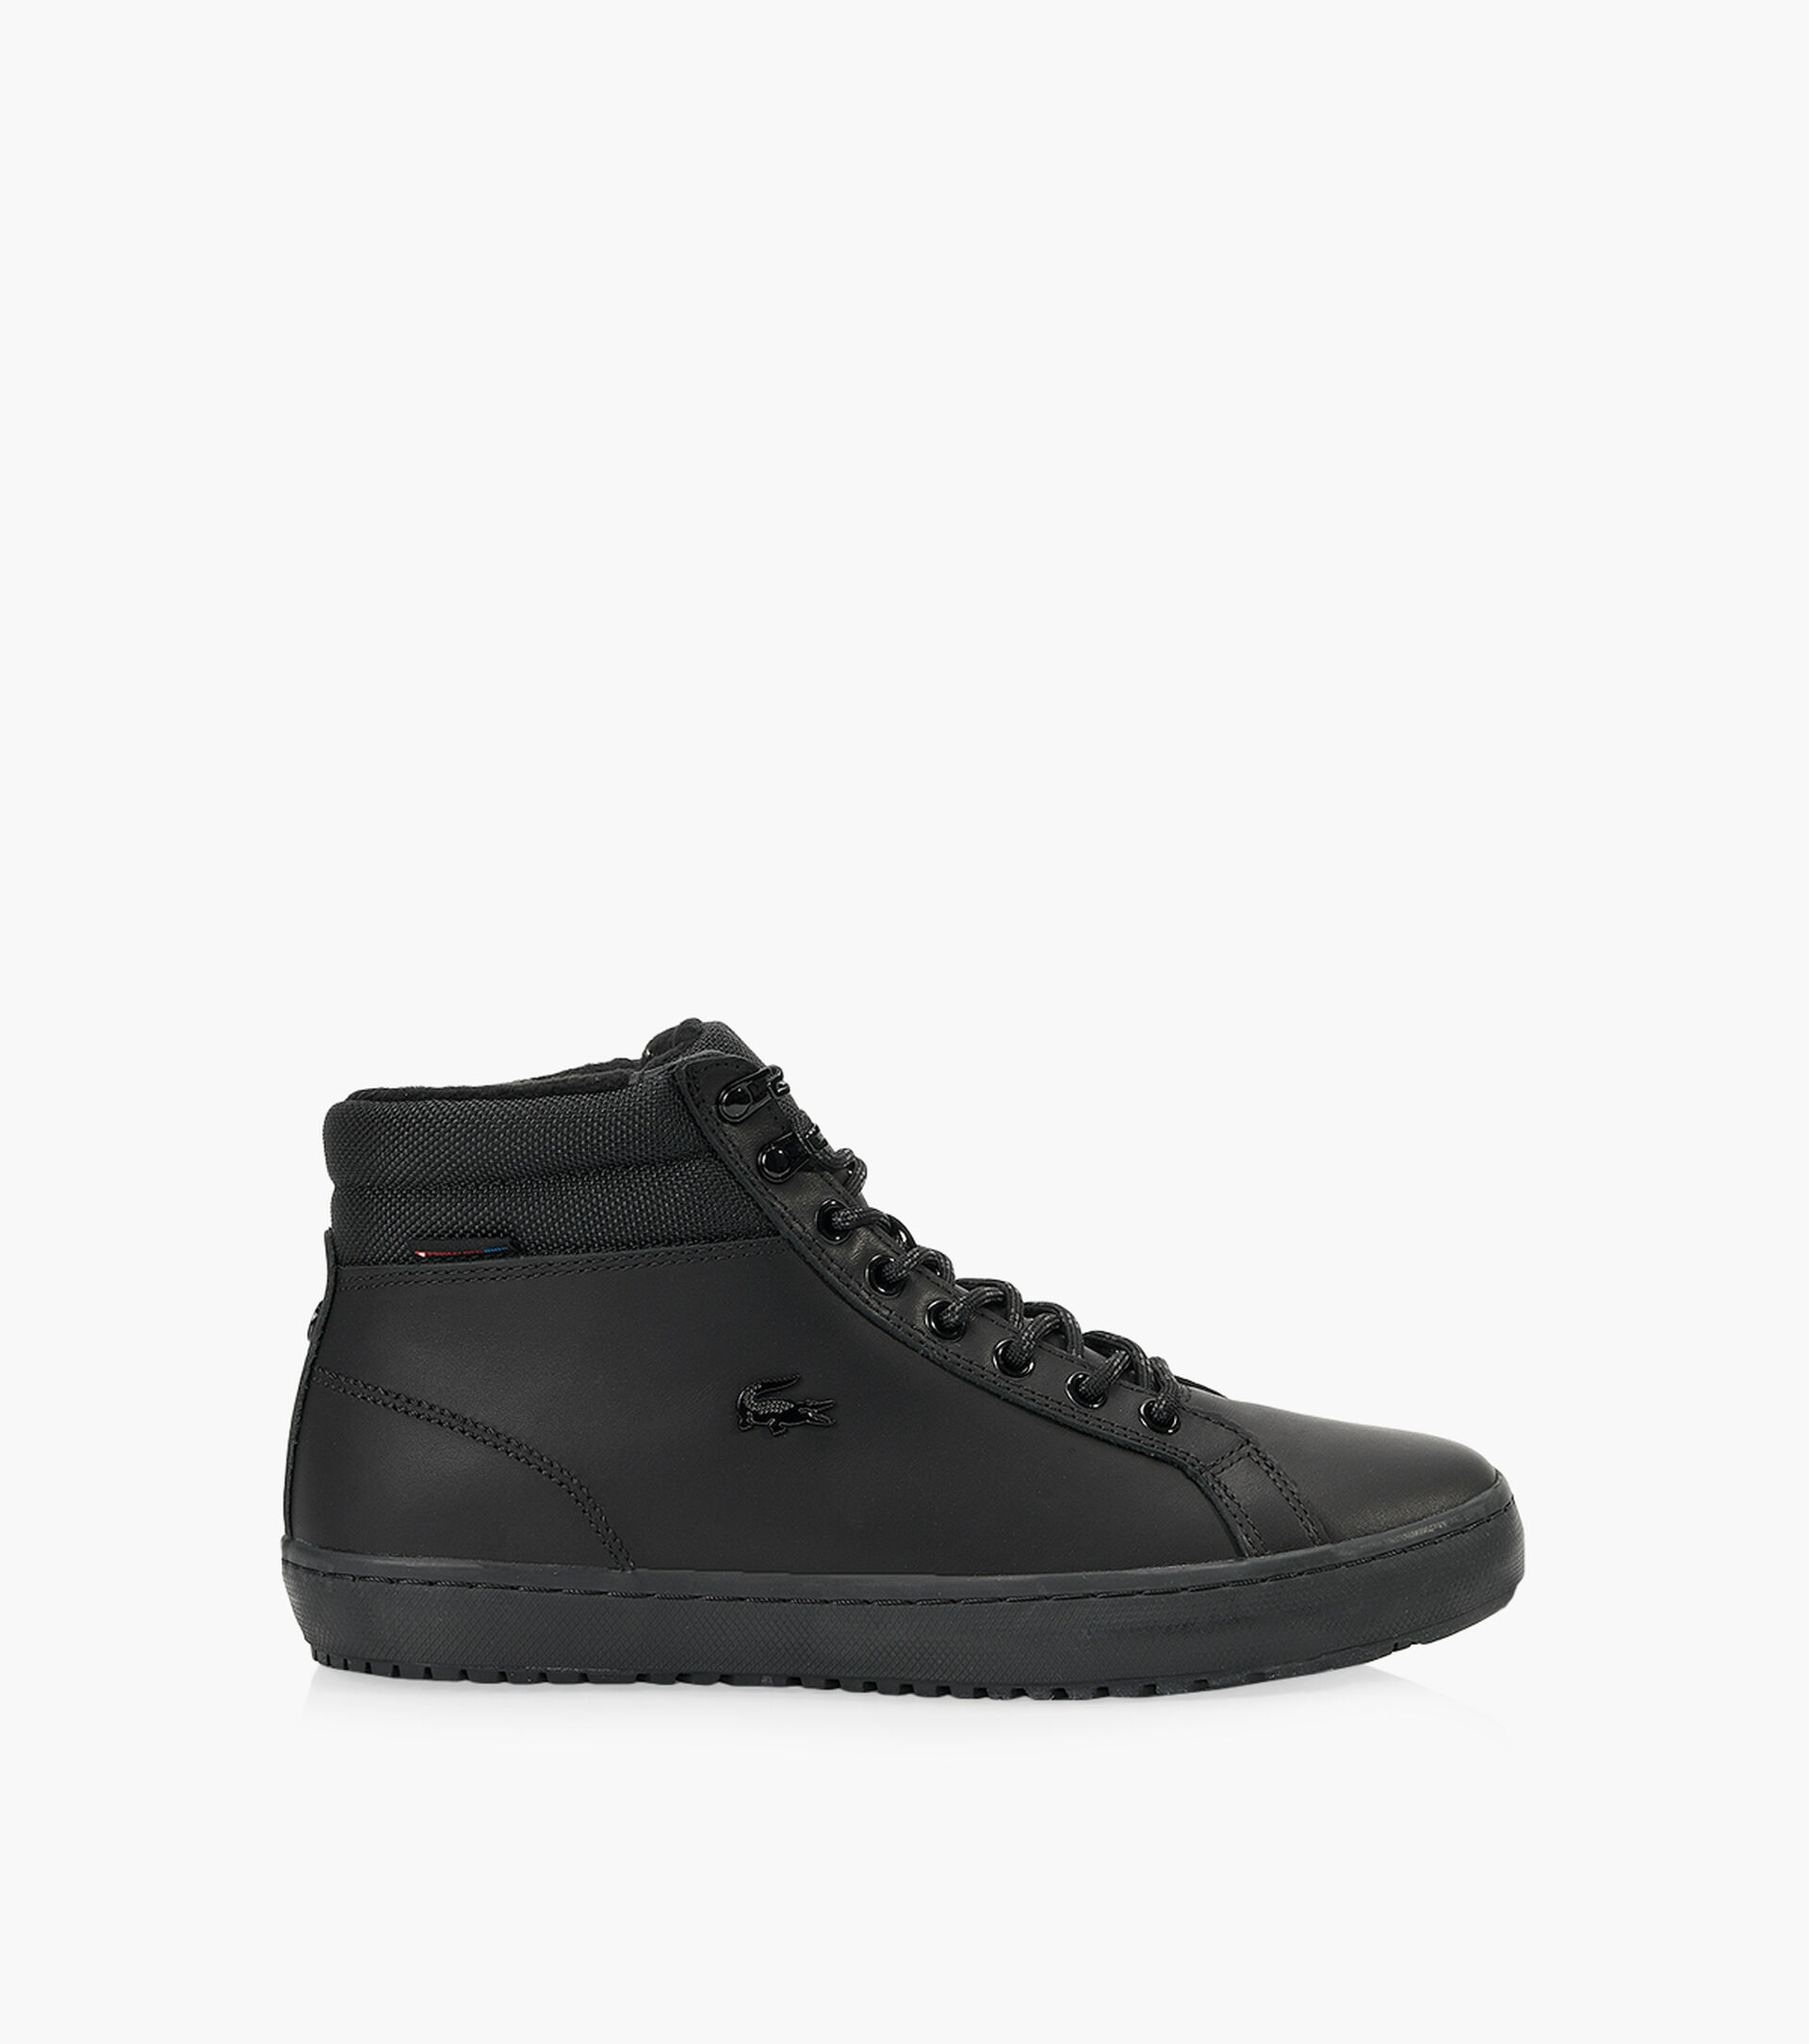 LACOSTE STRAIGHTSET THERMO - Black Leather | Browns Shoes